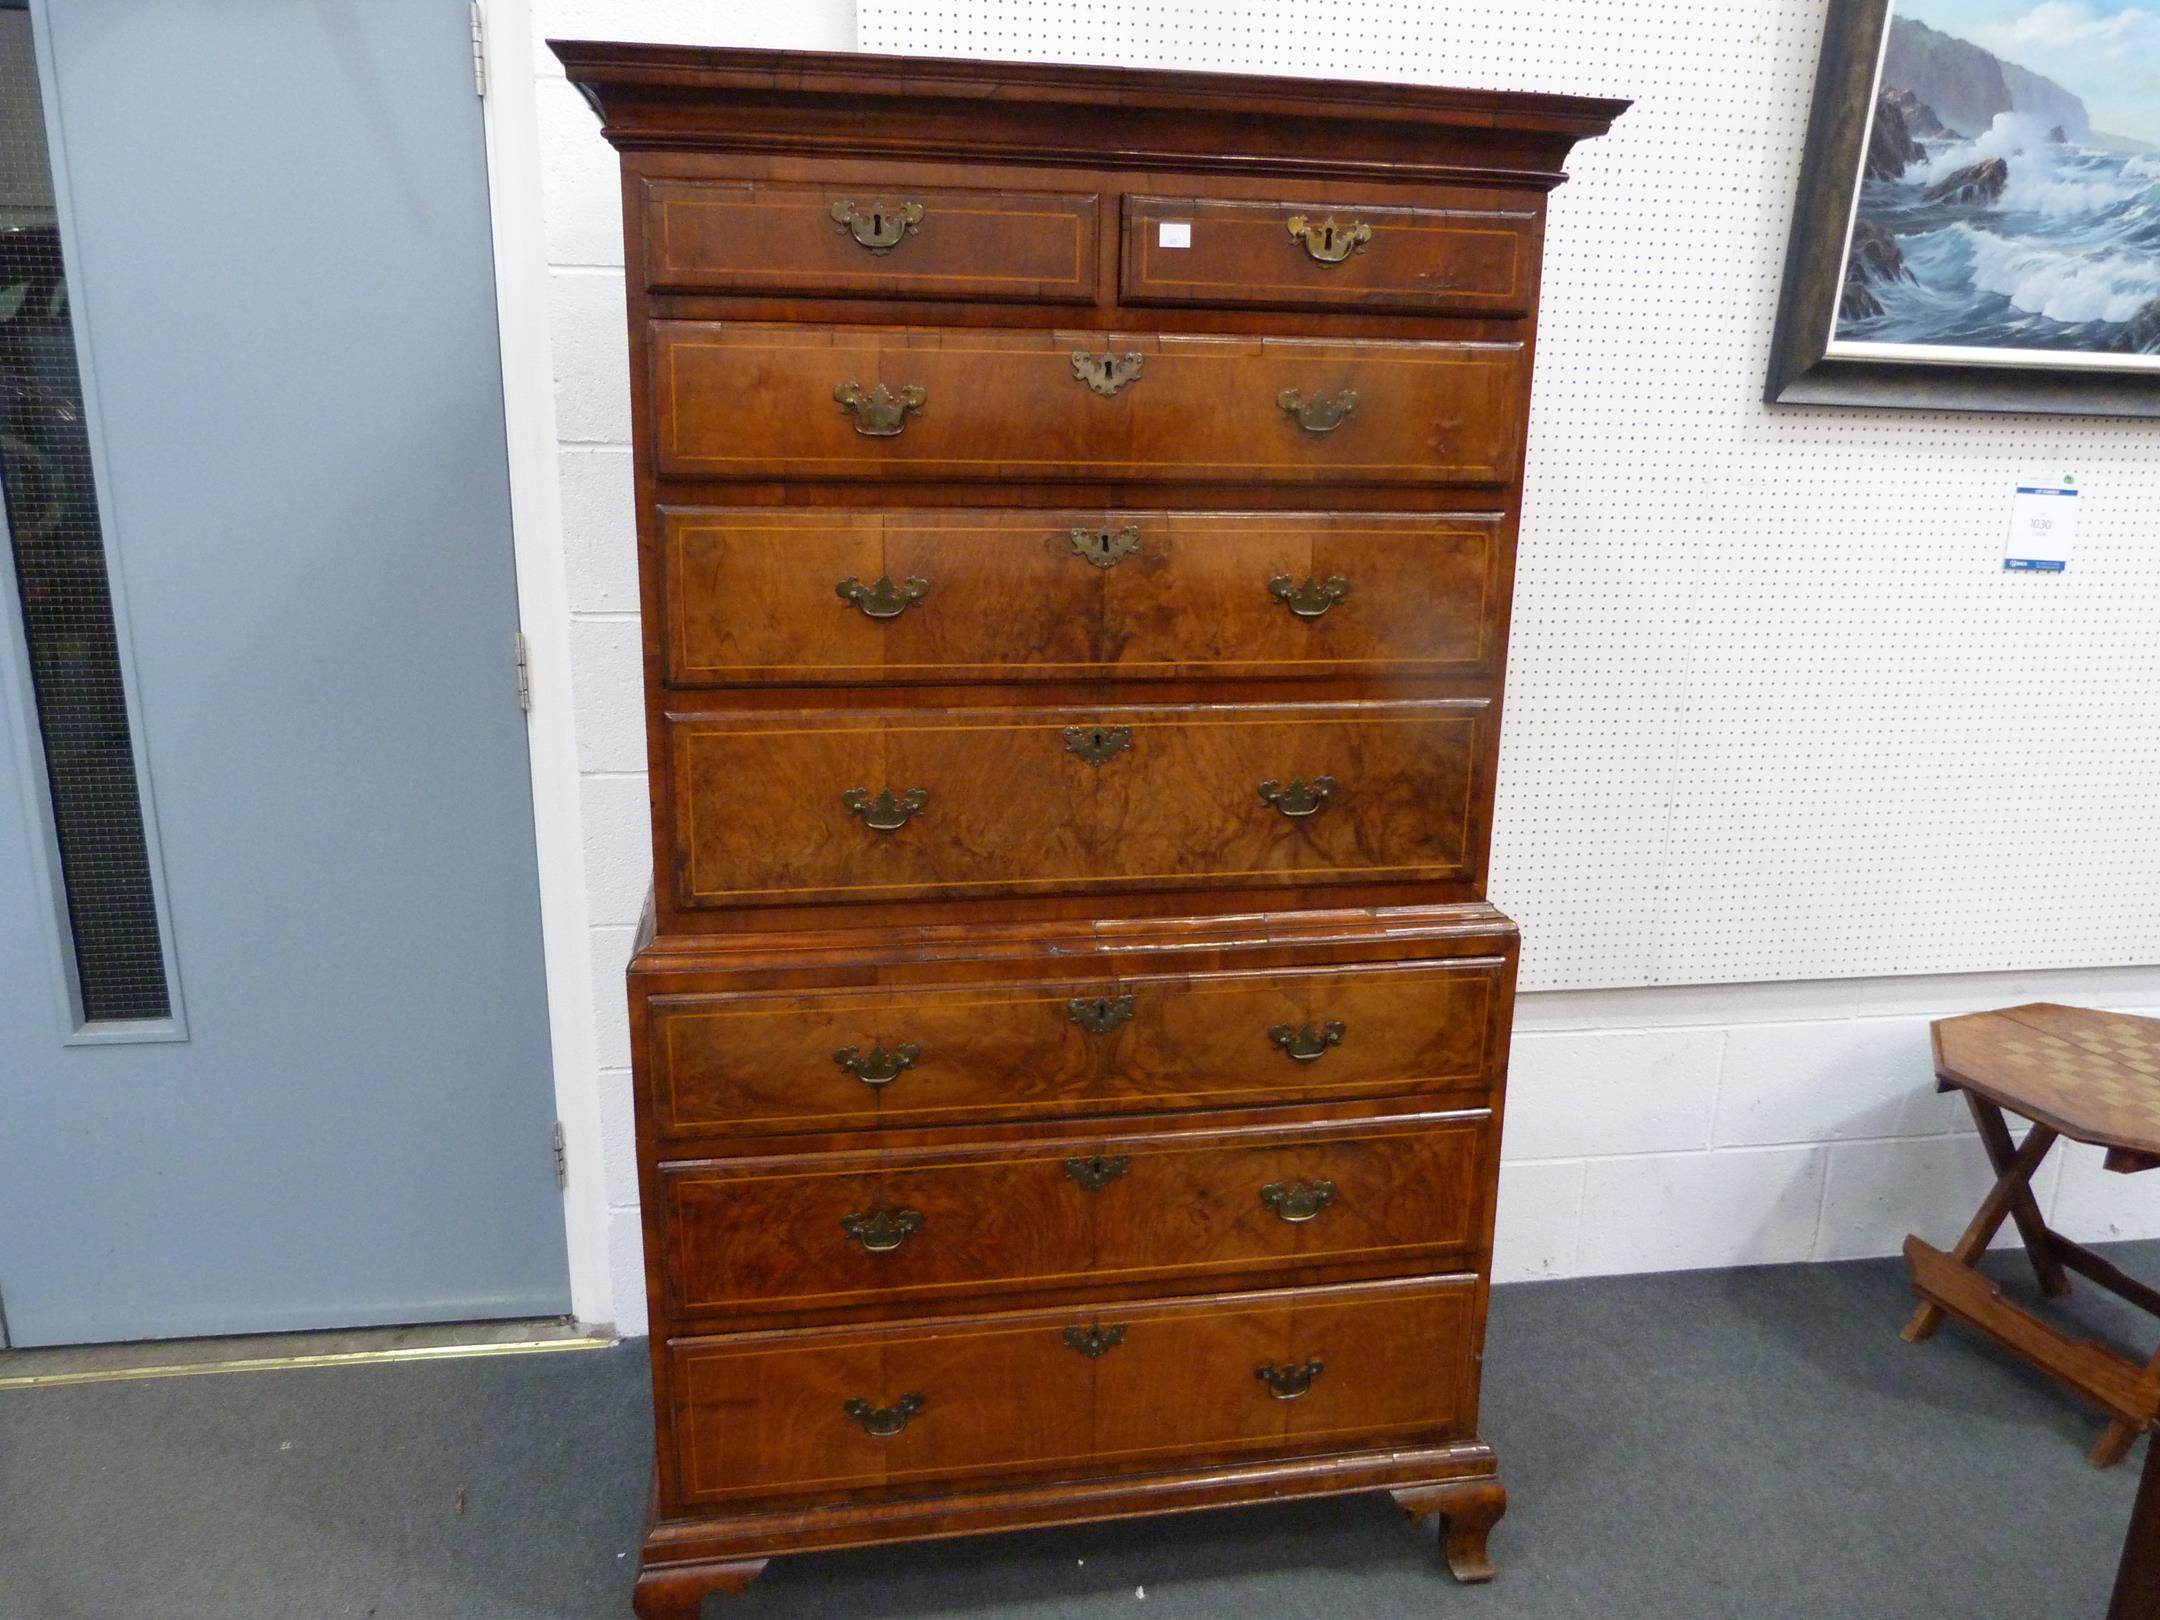 This is a Timed Online Auction on Bidspotter.co.uk, Click here to bid. An 18th Century Walnut